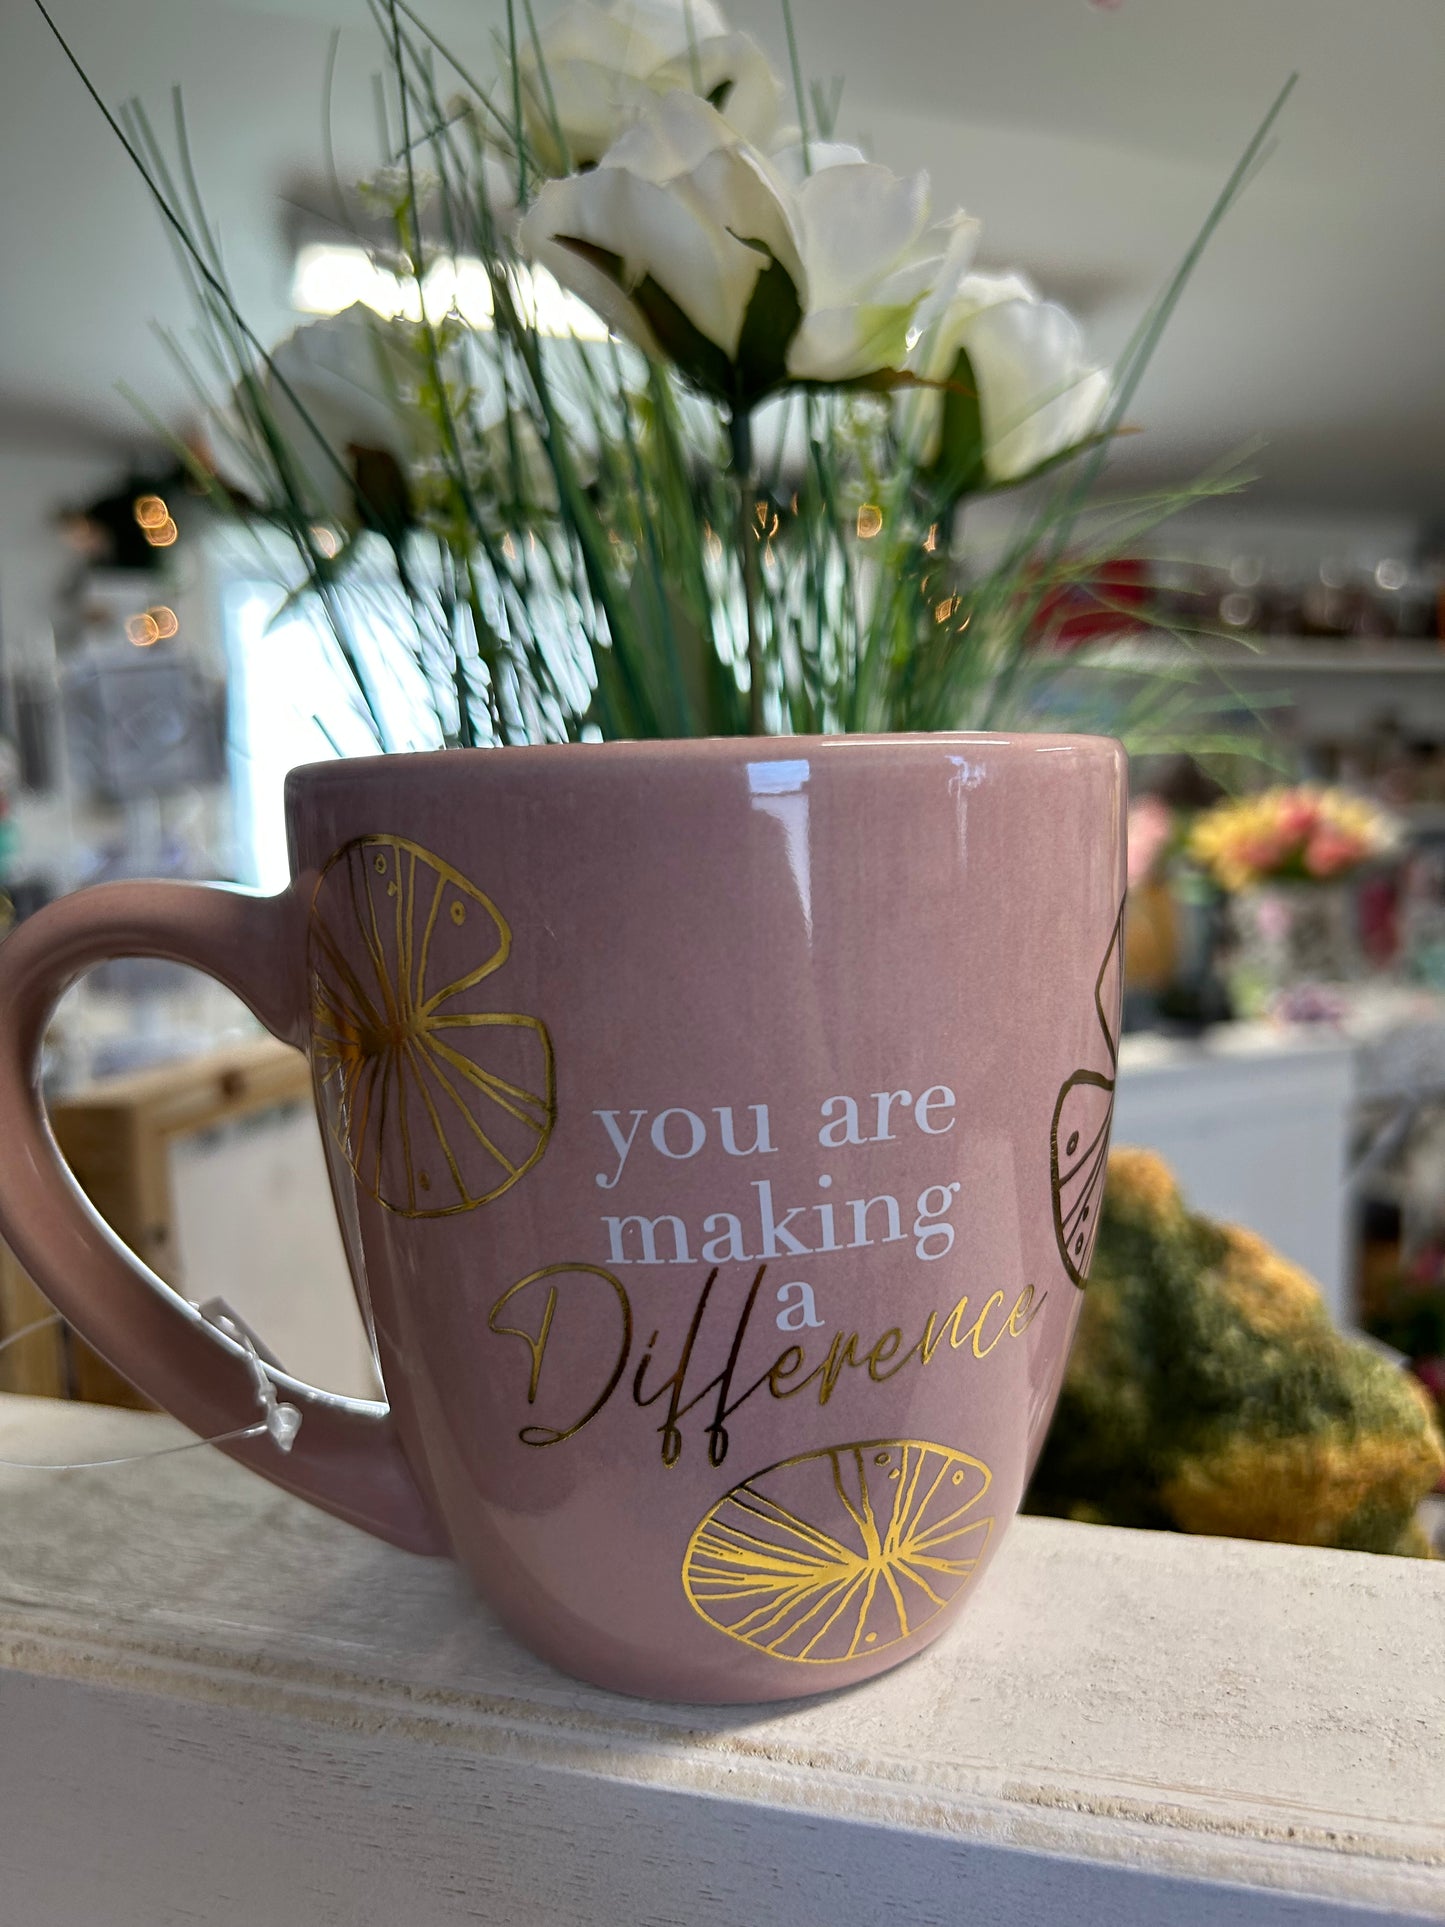 Pink Mug with Sentiment “you are making a difference”